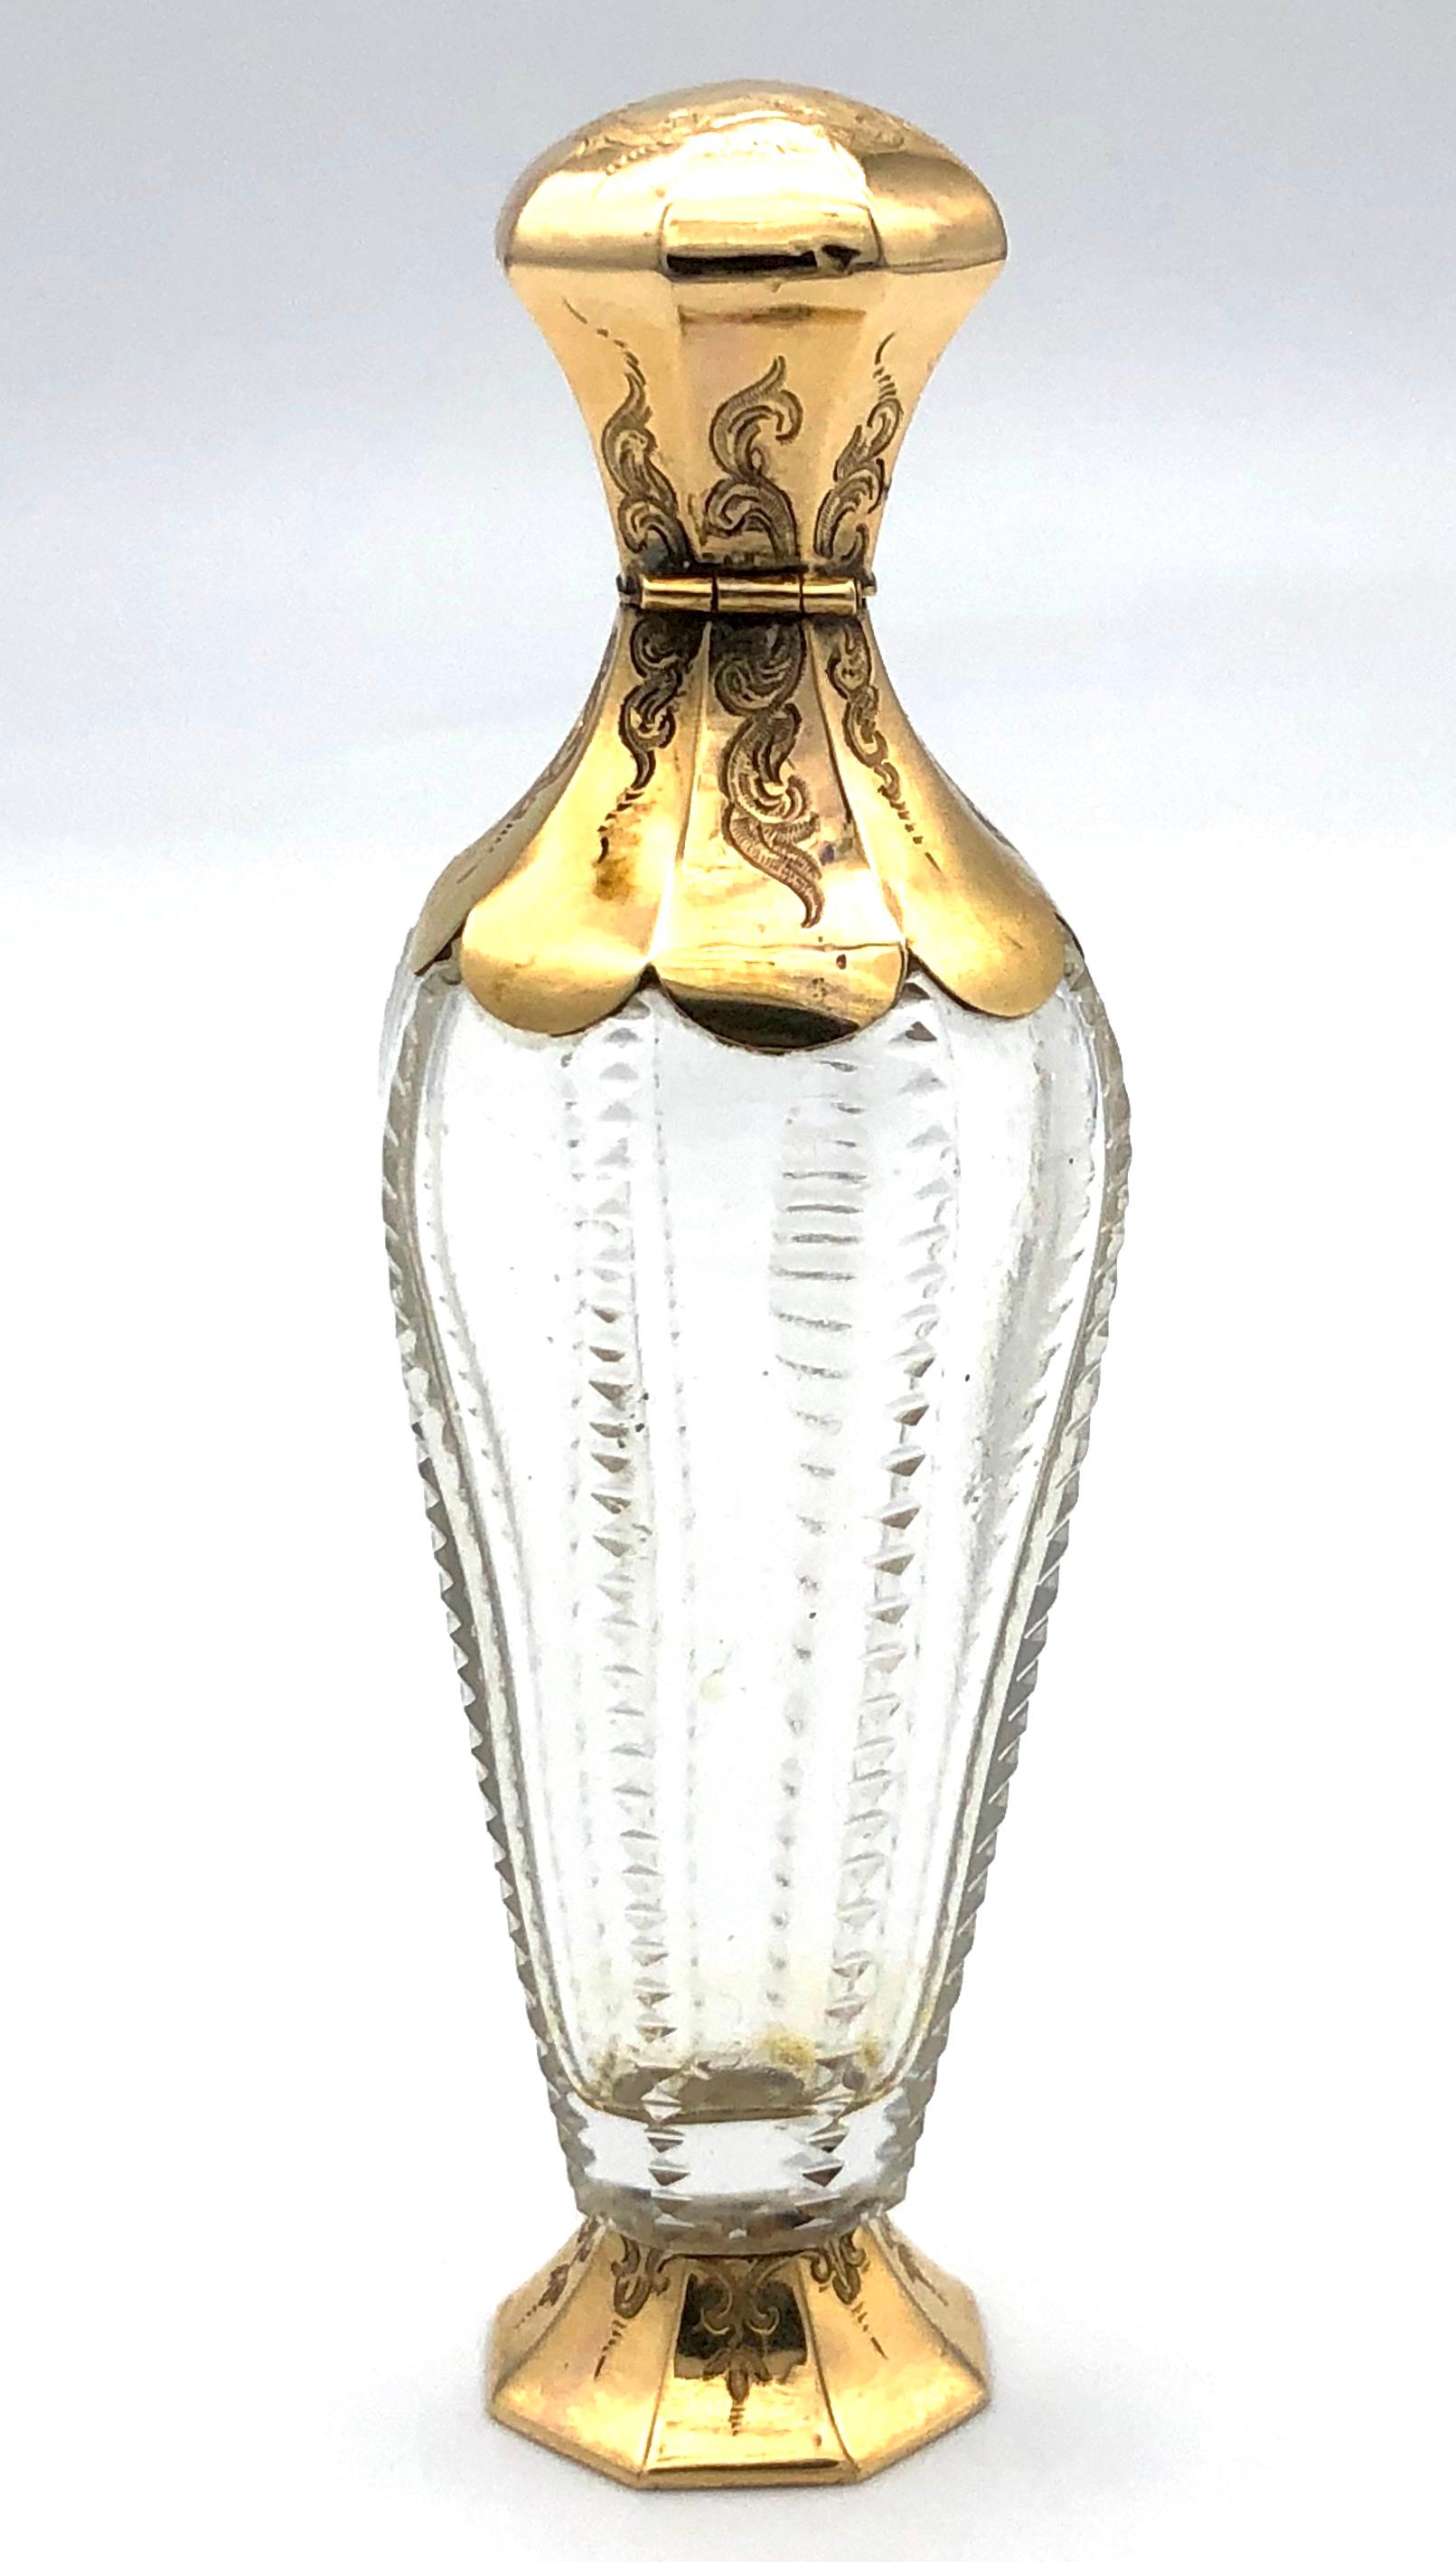 The highly elegant and slender perfume bottle is made out of gold and crystal glas.
The crystal glas is decorated with exquisitely cut triangles that form vertical lines which divide the bottle into eight segments. The scent bottle stands on a